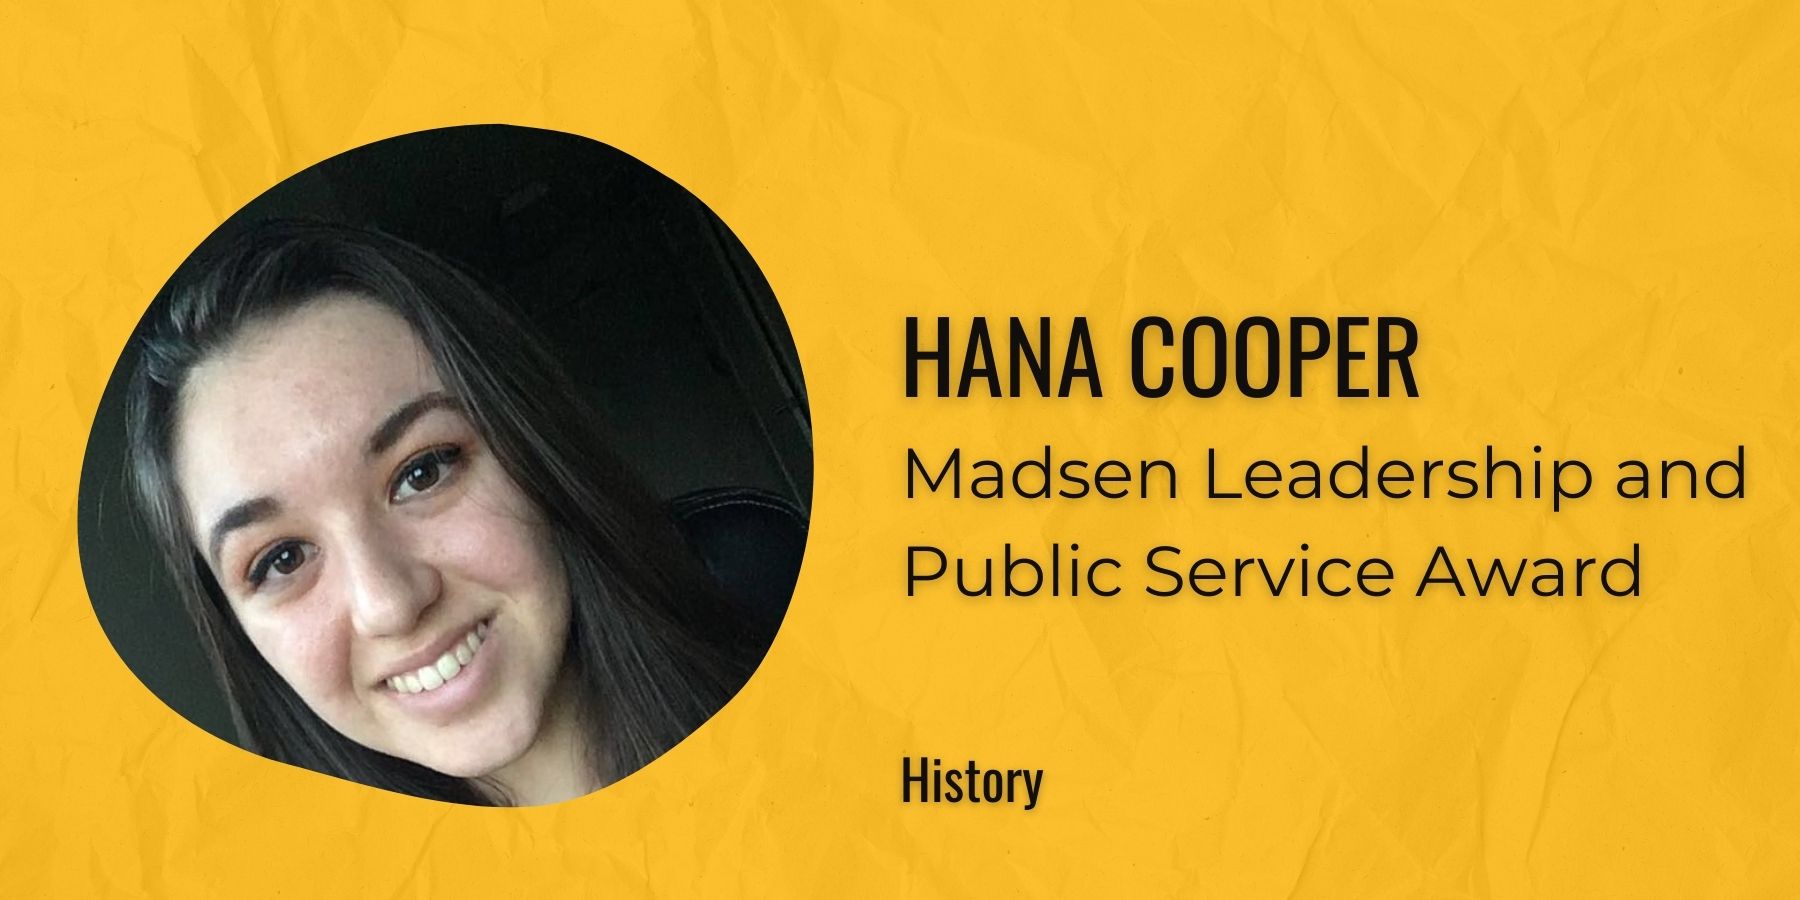 Image of Hana Cooper with text: Madsen Leadership and Public Service Award, History
